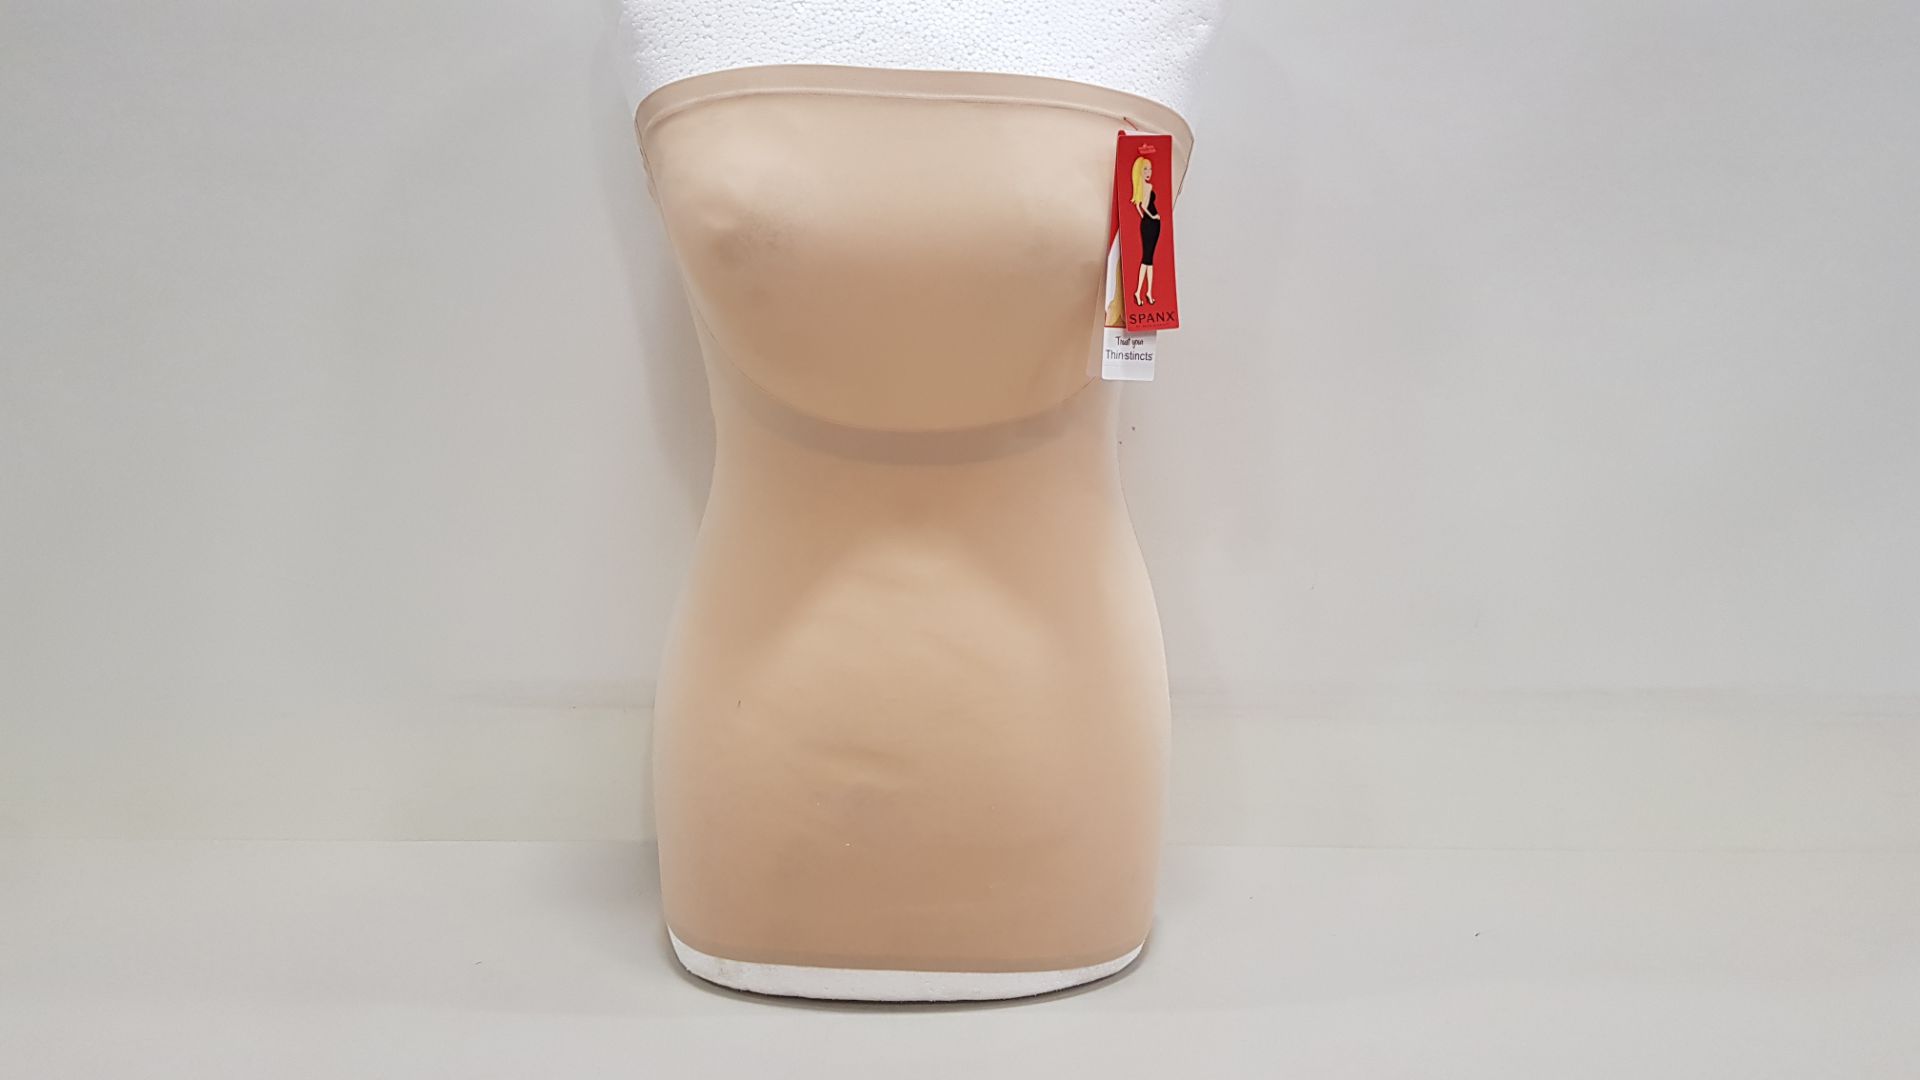 28 X BRAND NEW SPANX THIN-STINCTS, NATURAL, STRAPLESS TOP - SIZE SMALL (EBAY £18.99 - TOTAL £531)